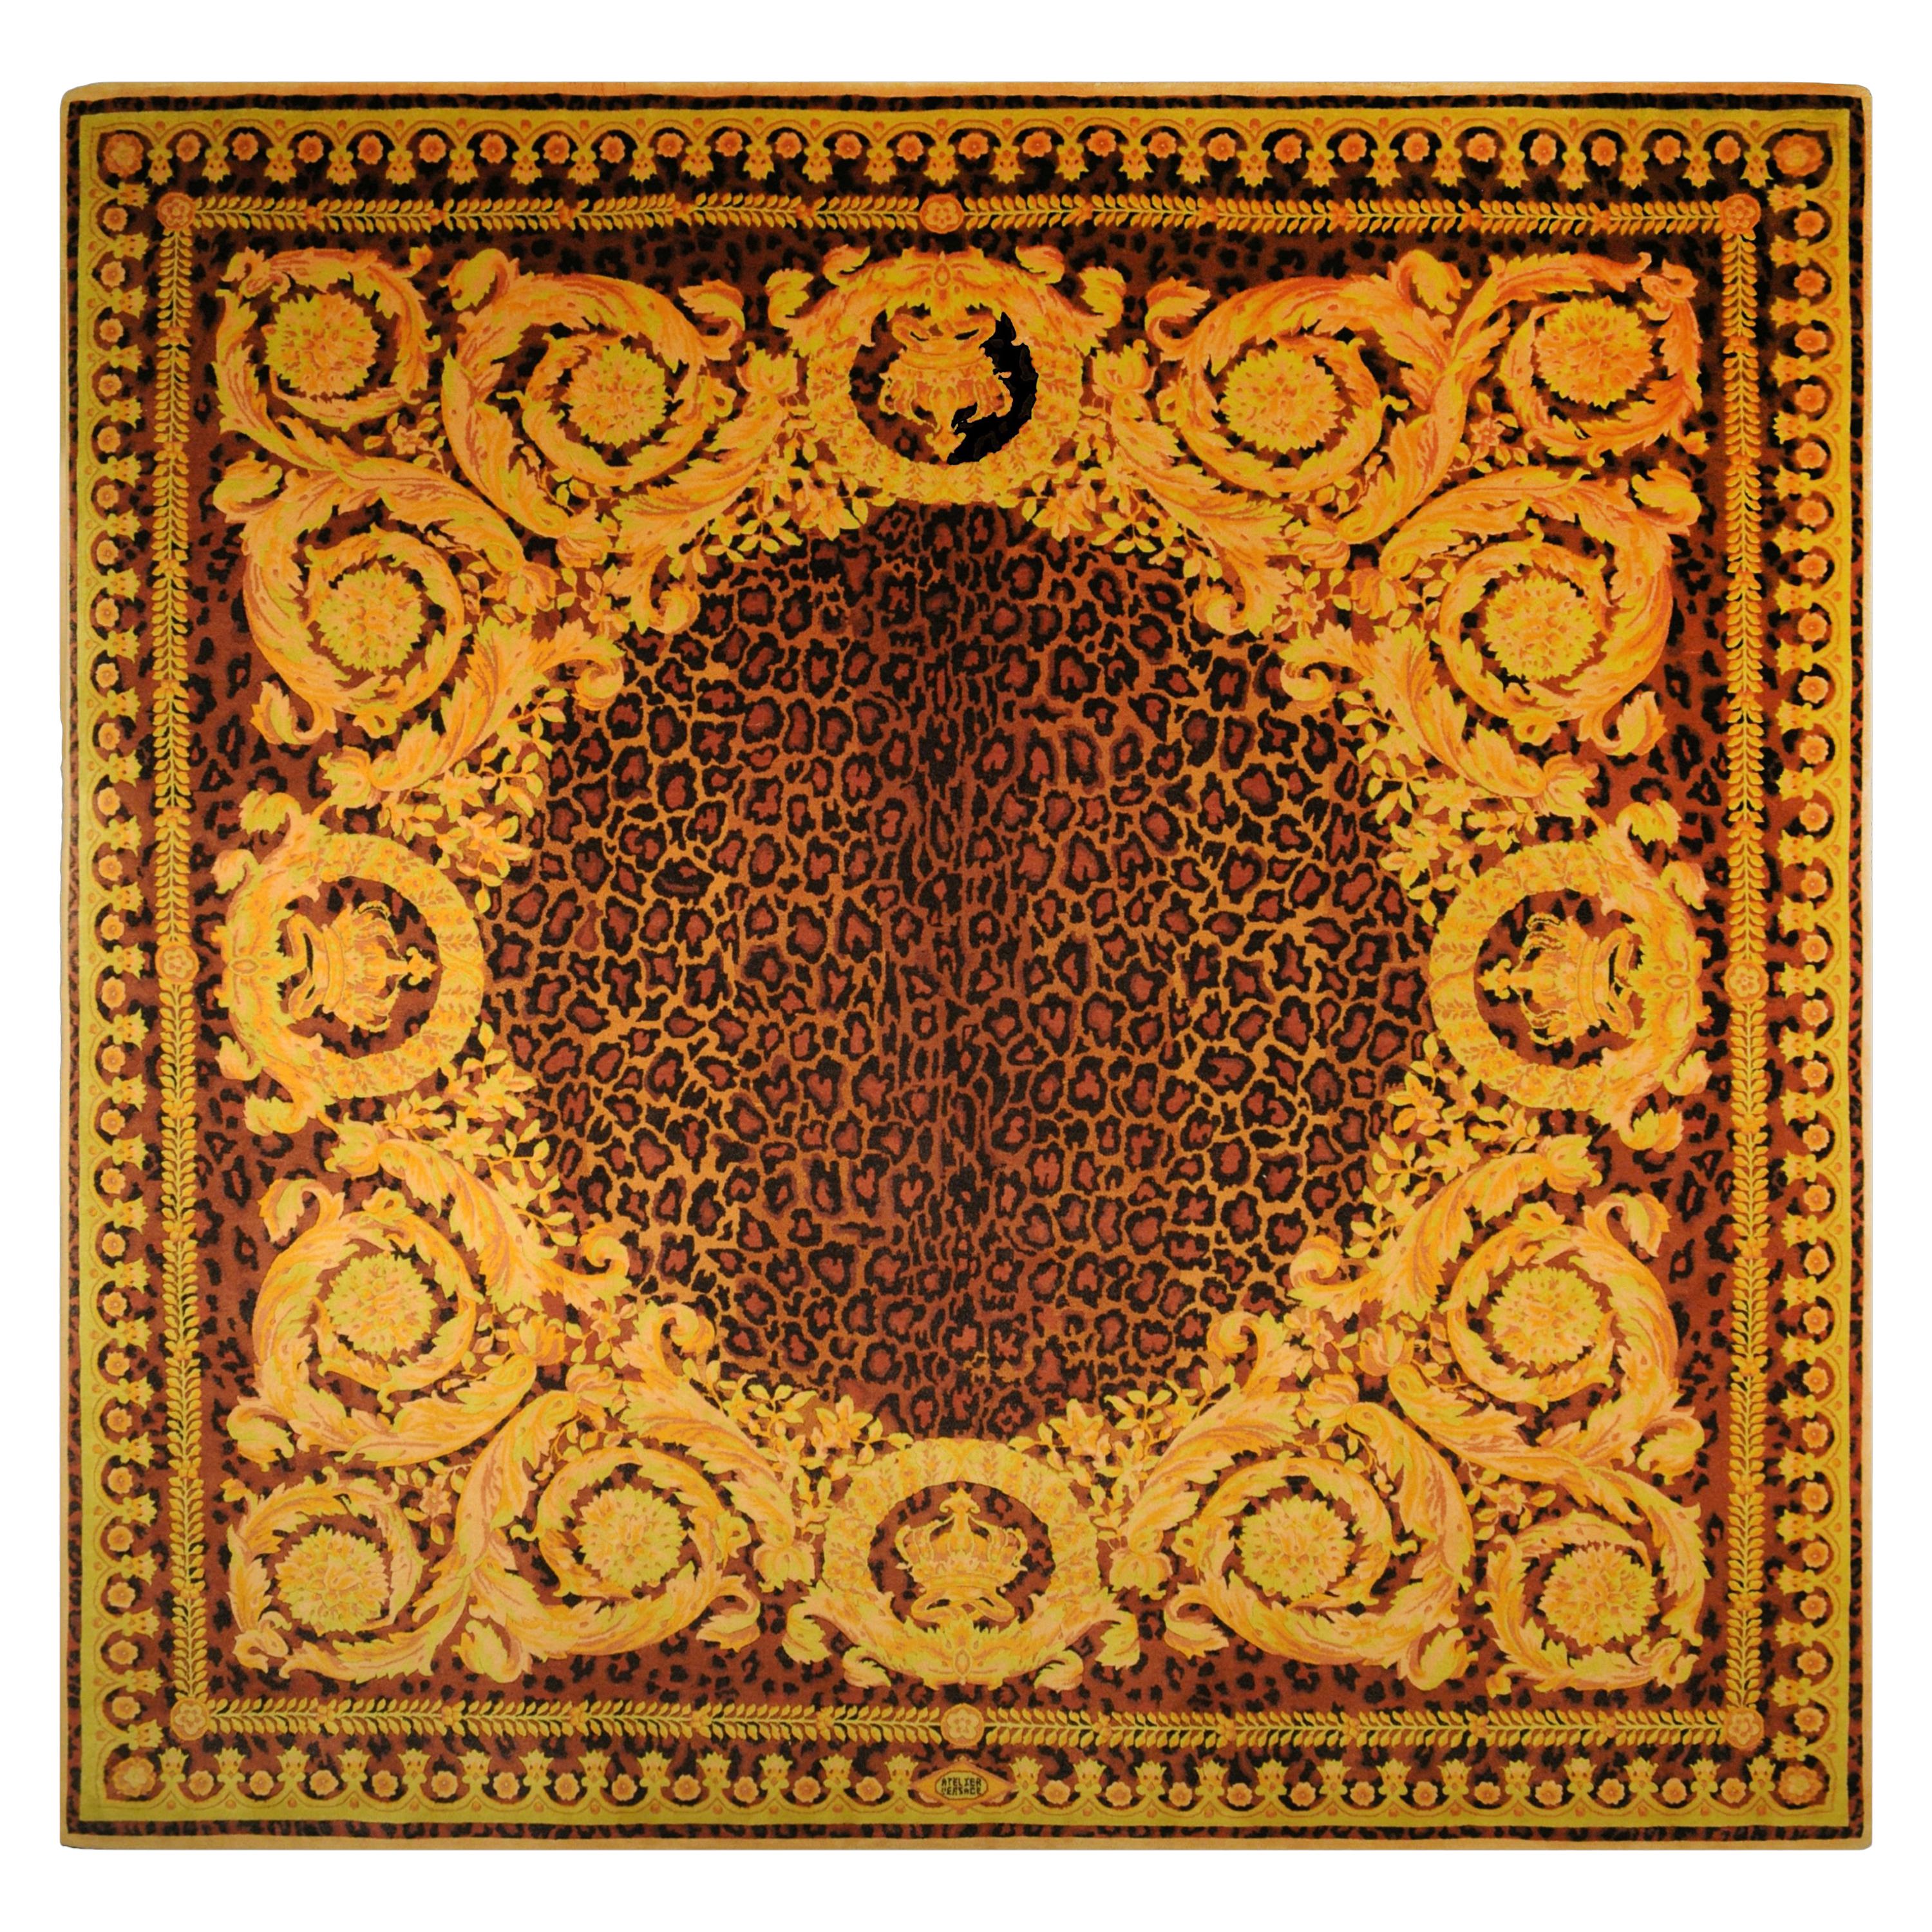 Gianni Versace Collection Rug Wild Barocco, Gold Leopard Animal Print, 1980